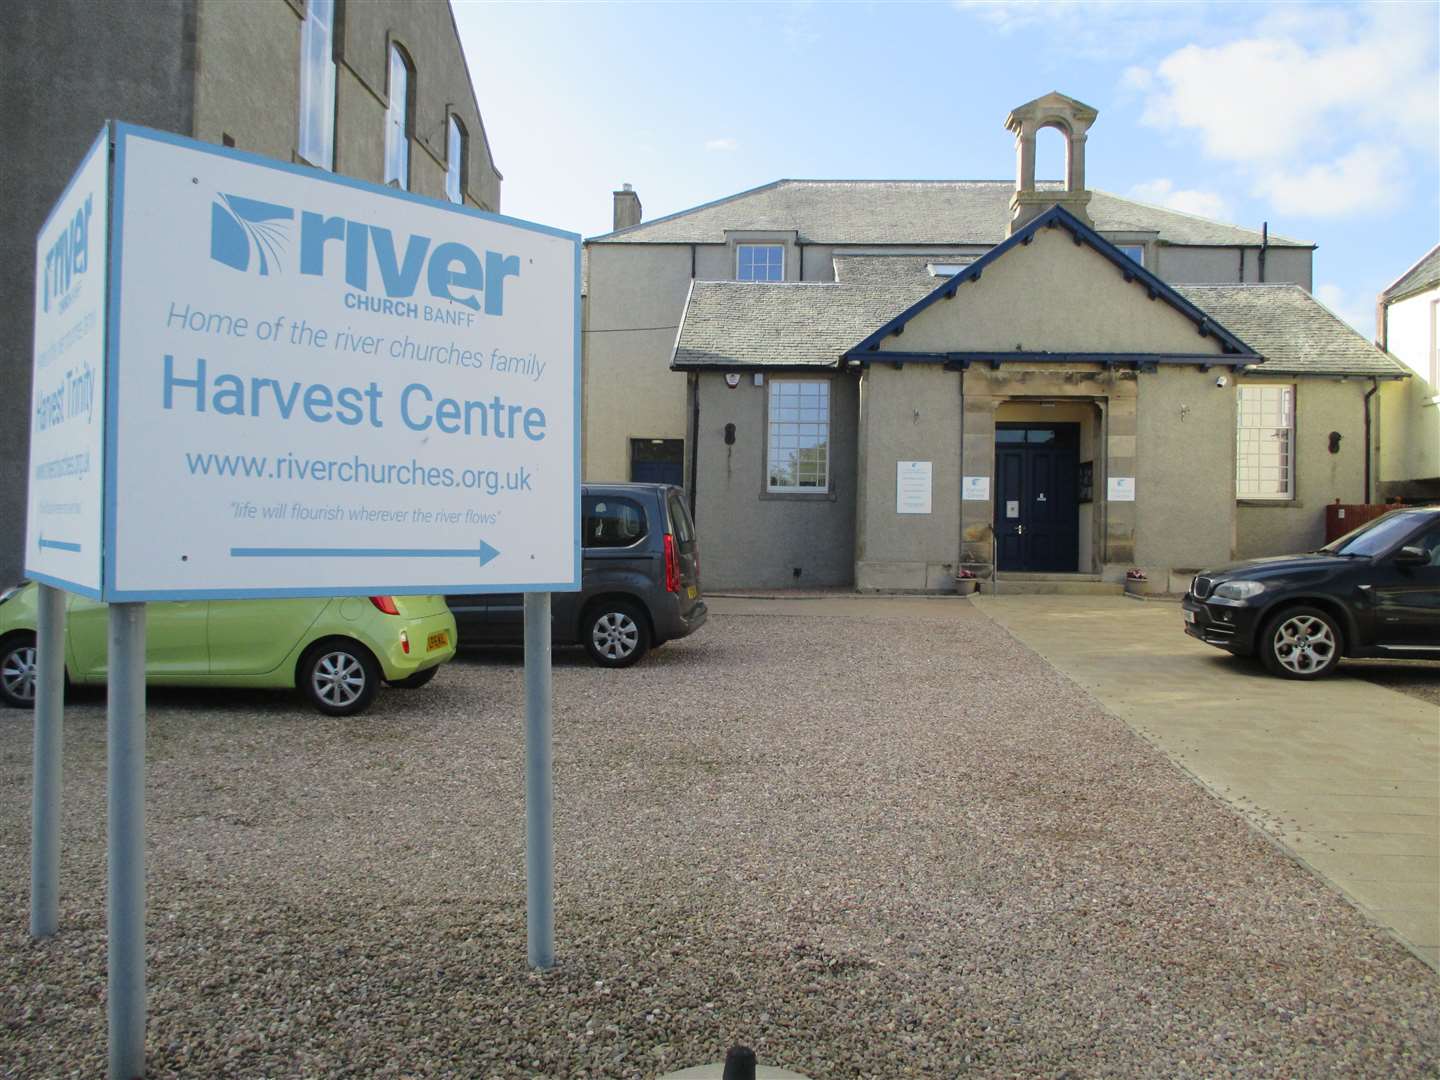 The support sessions will be held at the Harvest Centre in Banff.